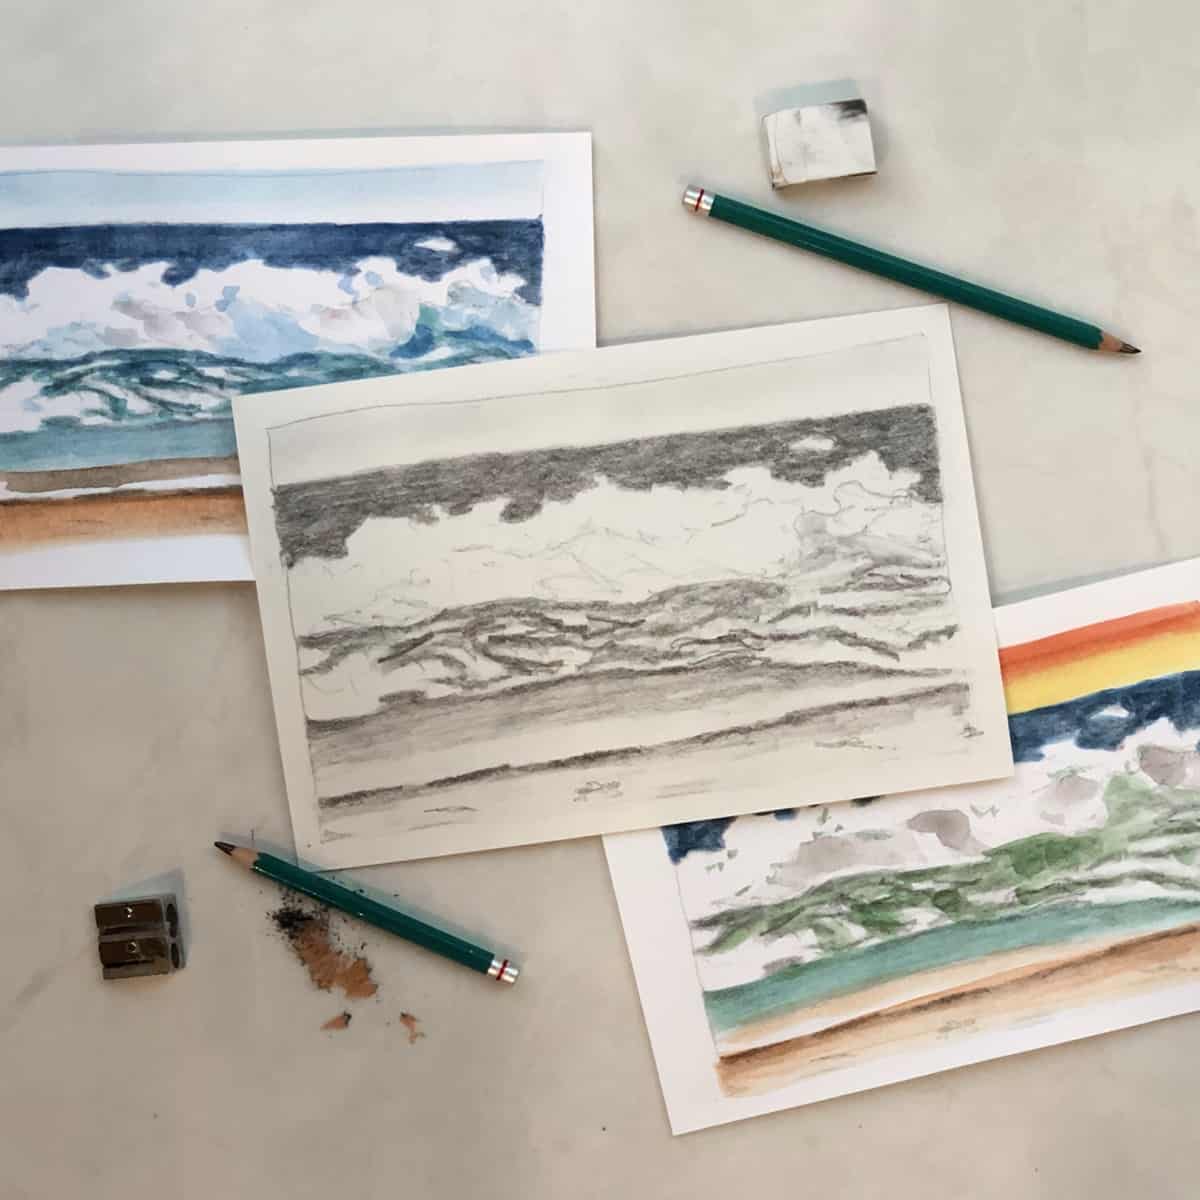 Drawing and paintings of seascapes with pencils, pencil sharpener, and eraser.